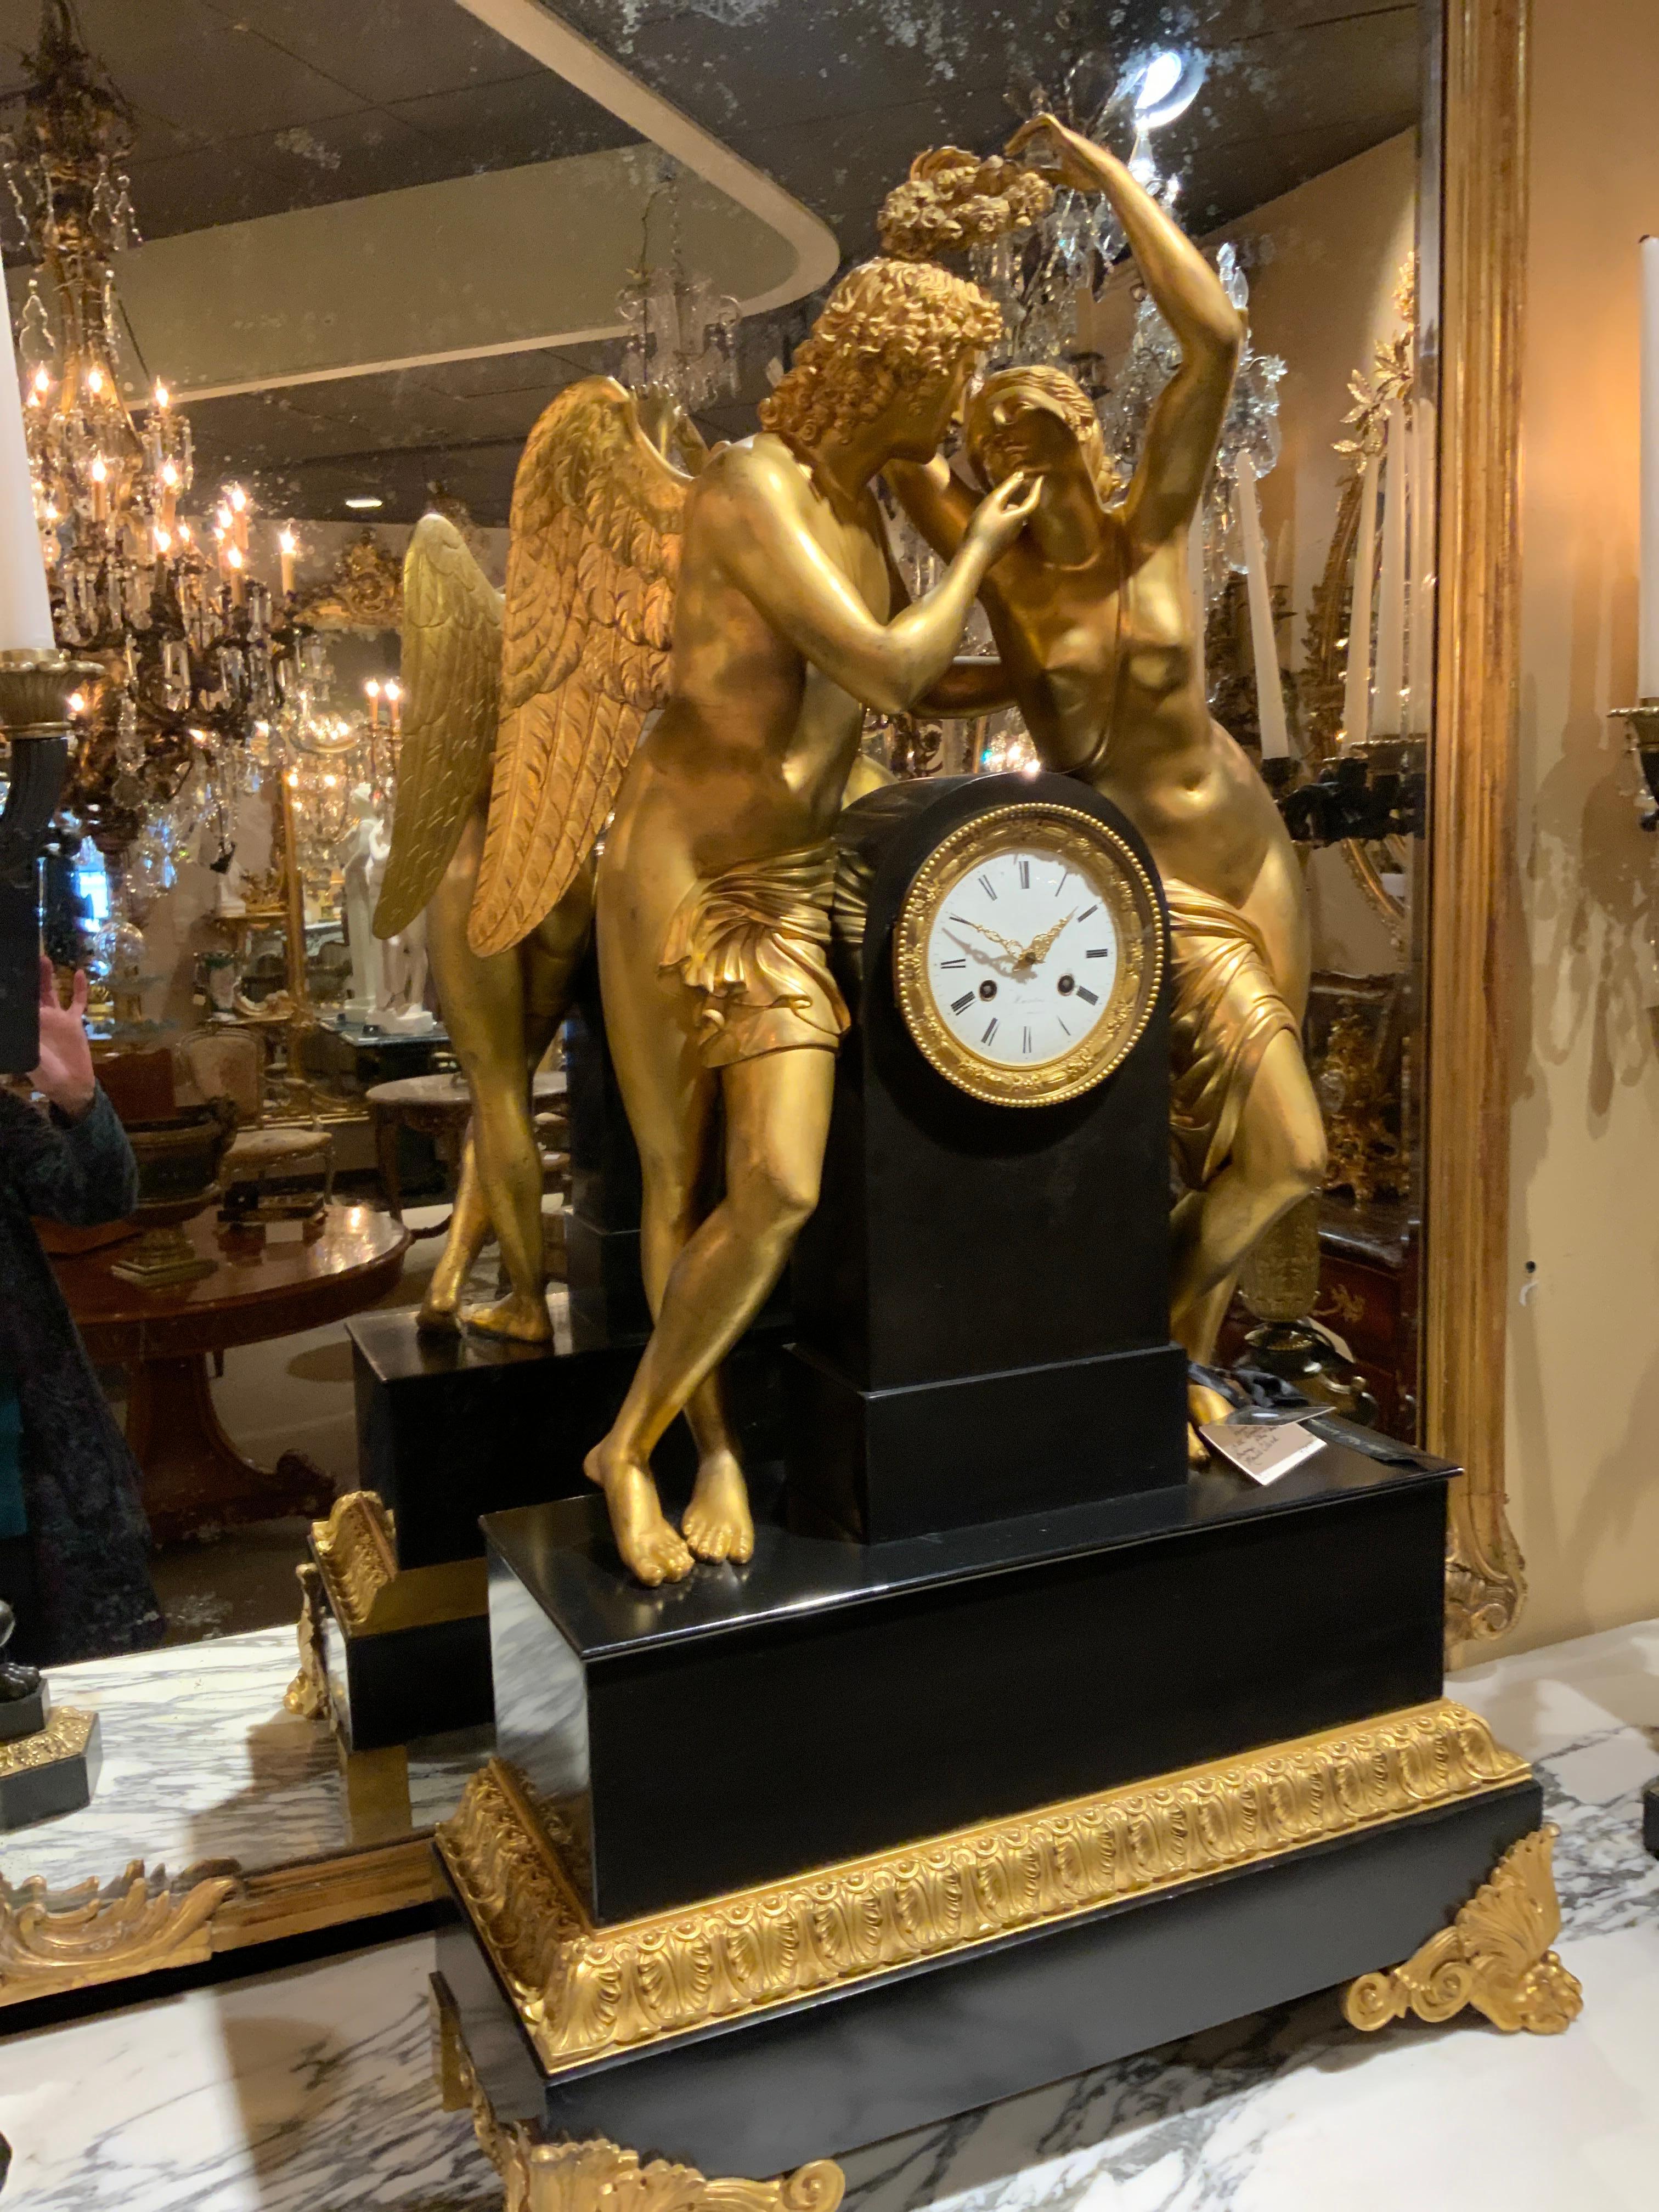 Amazing clock depicting the tale of Amor and Psyche which
Is about the god of love in Greek mythology. Large bronze
Dore figures adorn the pediment standing on a rectangular
Marble base. It has an enamel face marked with Roman numerals. On the face